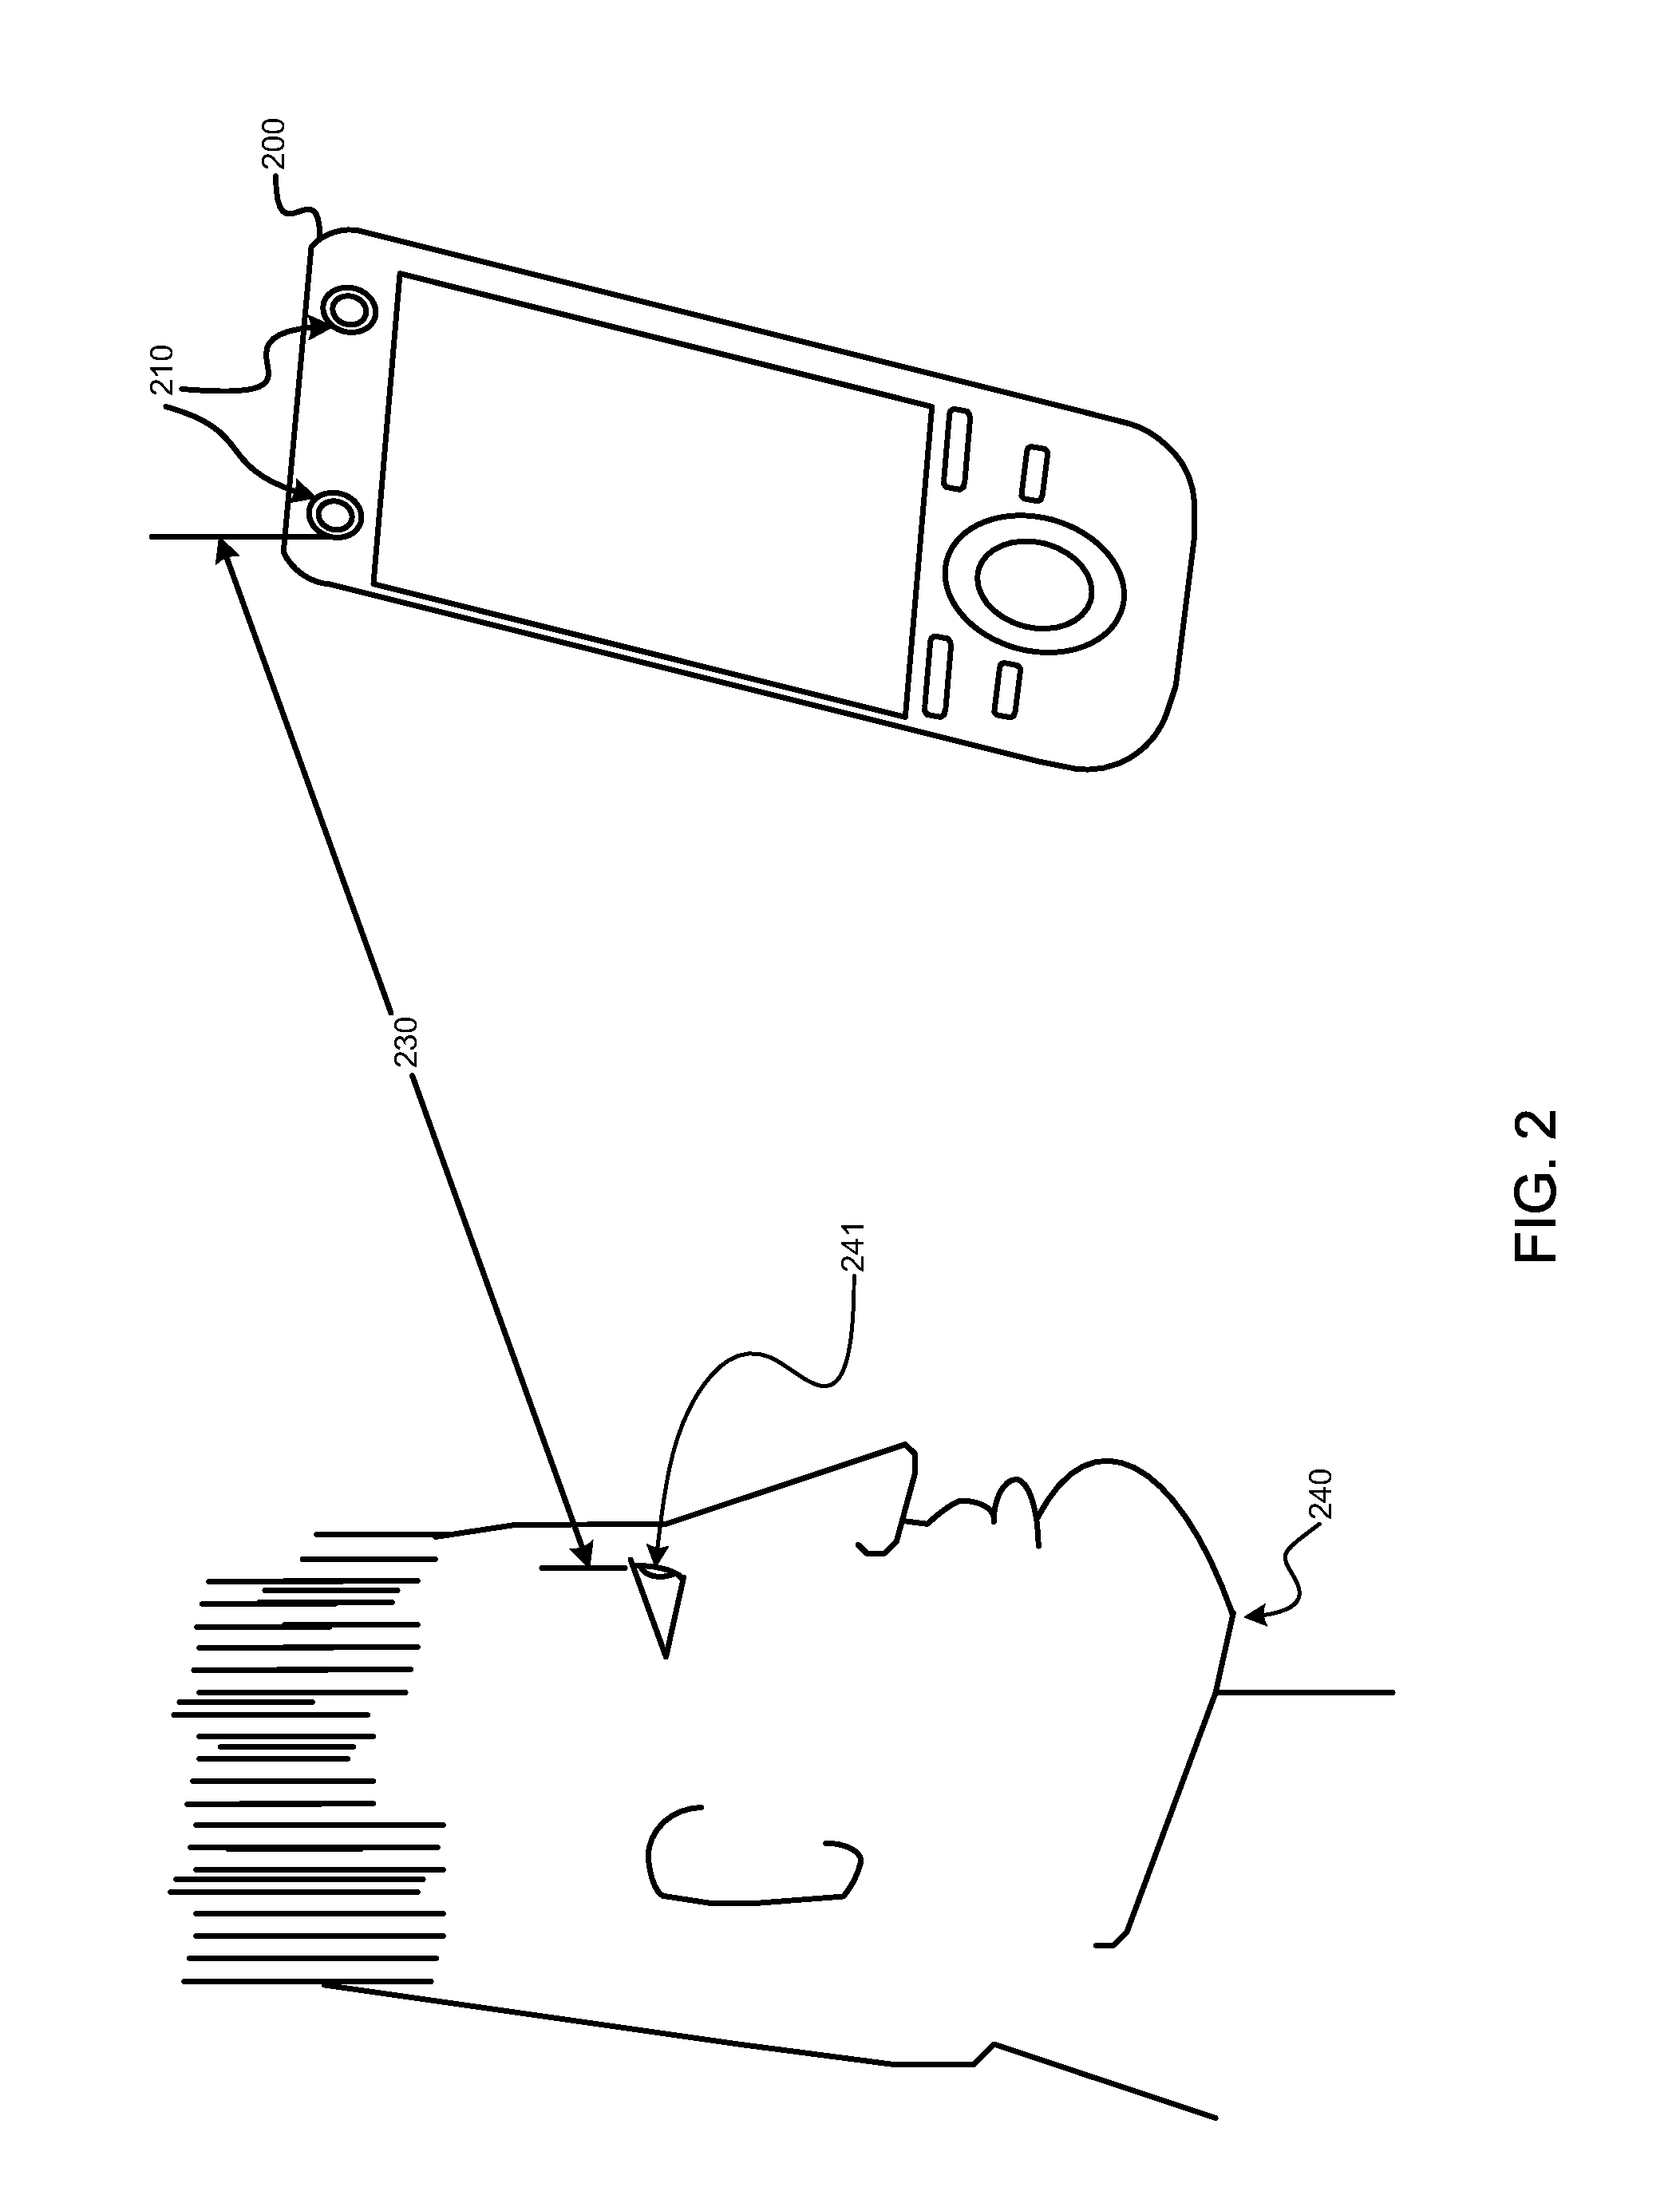 Method and apparatus of reducing visual vibration of a mobile electronic display